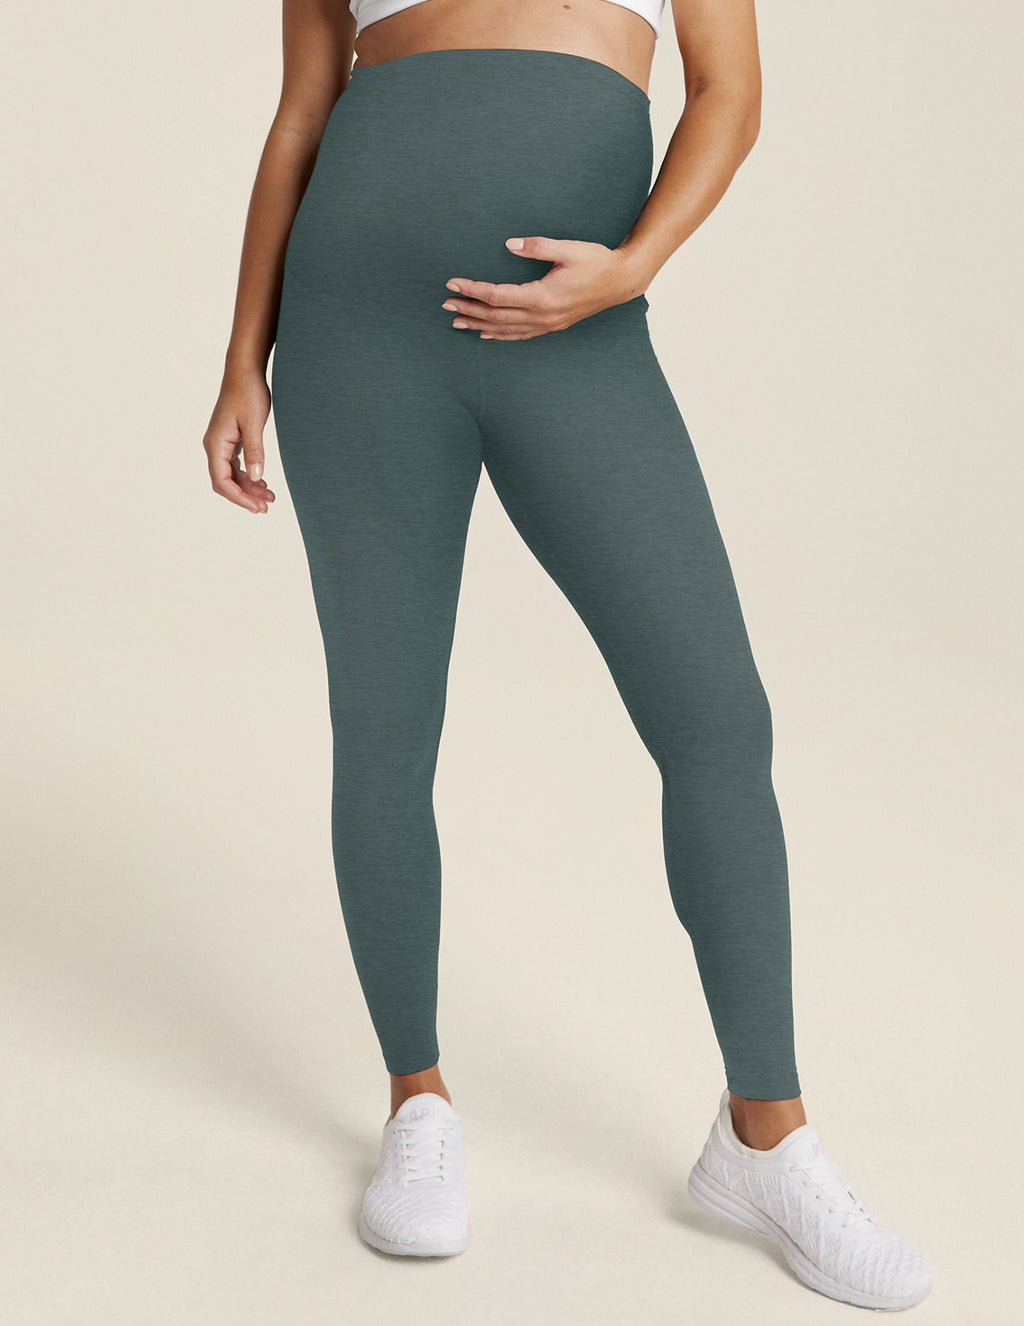 Women's Maternity Leggings Yoga Workout Bottoms Over The Belly Pregnancy  Yoga Pants With Pocket Winter Activewear High Elasticity Breathable Soft